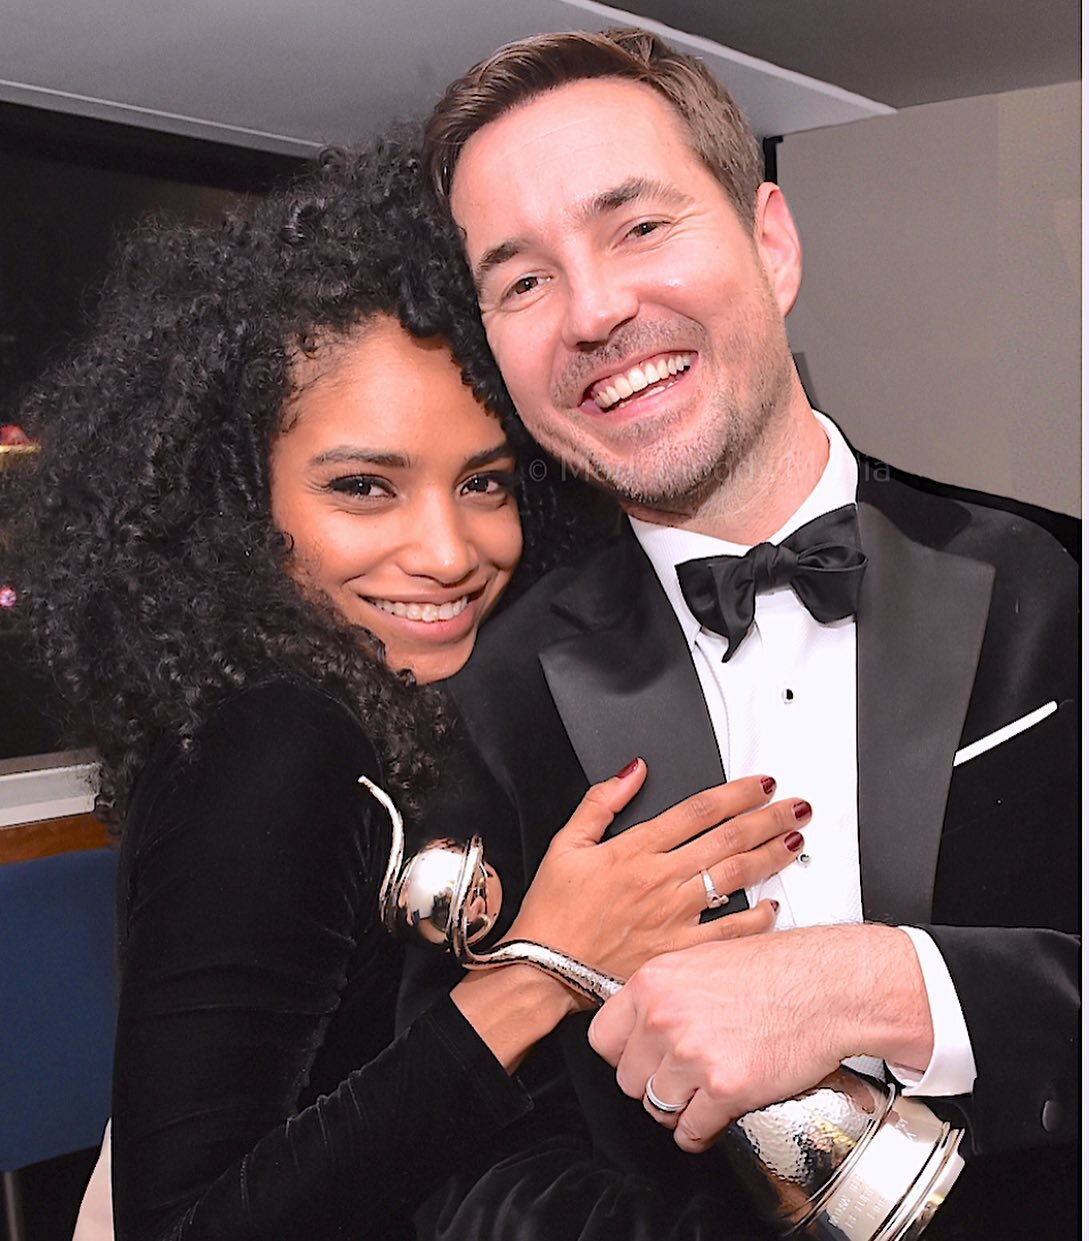 One of the highlights of this years NTA awards was seeing the whole production team of Line of Duty, who attended the awards, celebrating in the OK! Magazine box. Martin Compston and his beautiful wife Tianna Chanel Flynn clung to each other all even